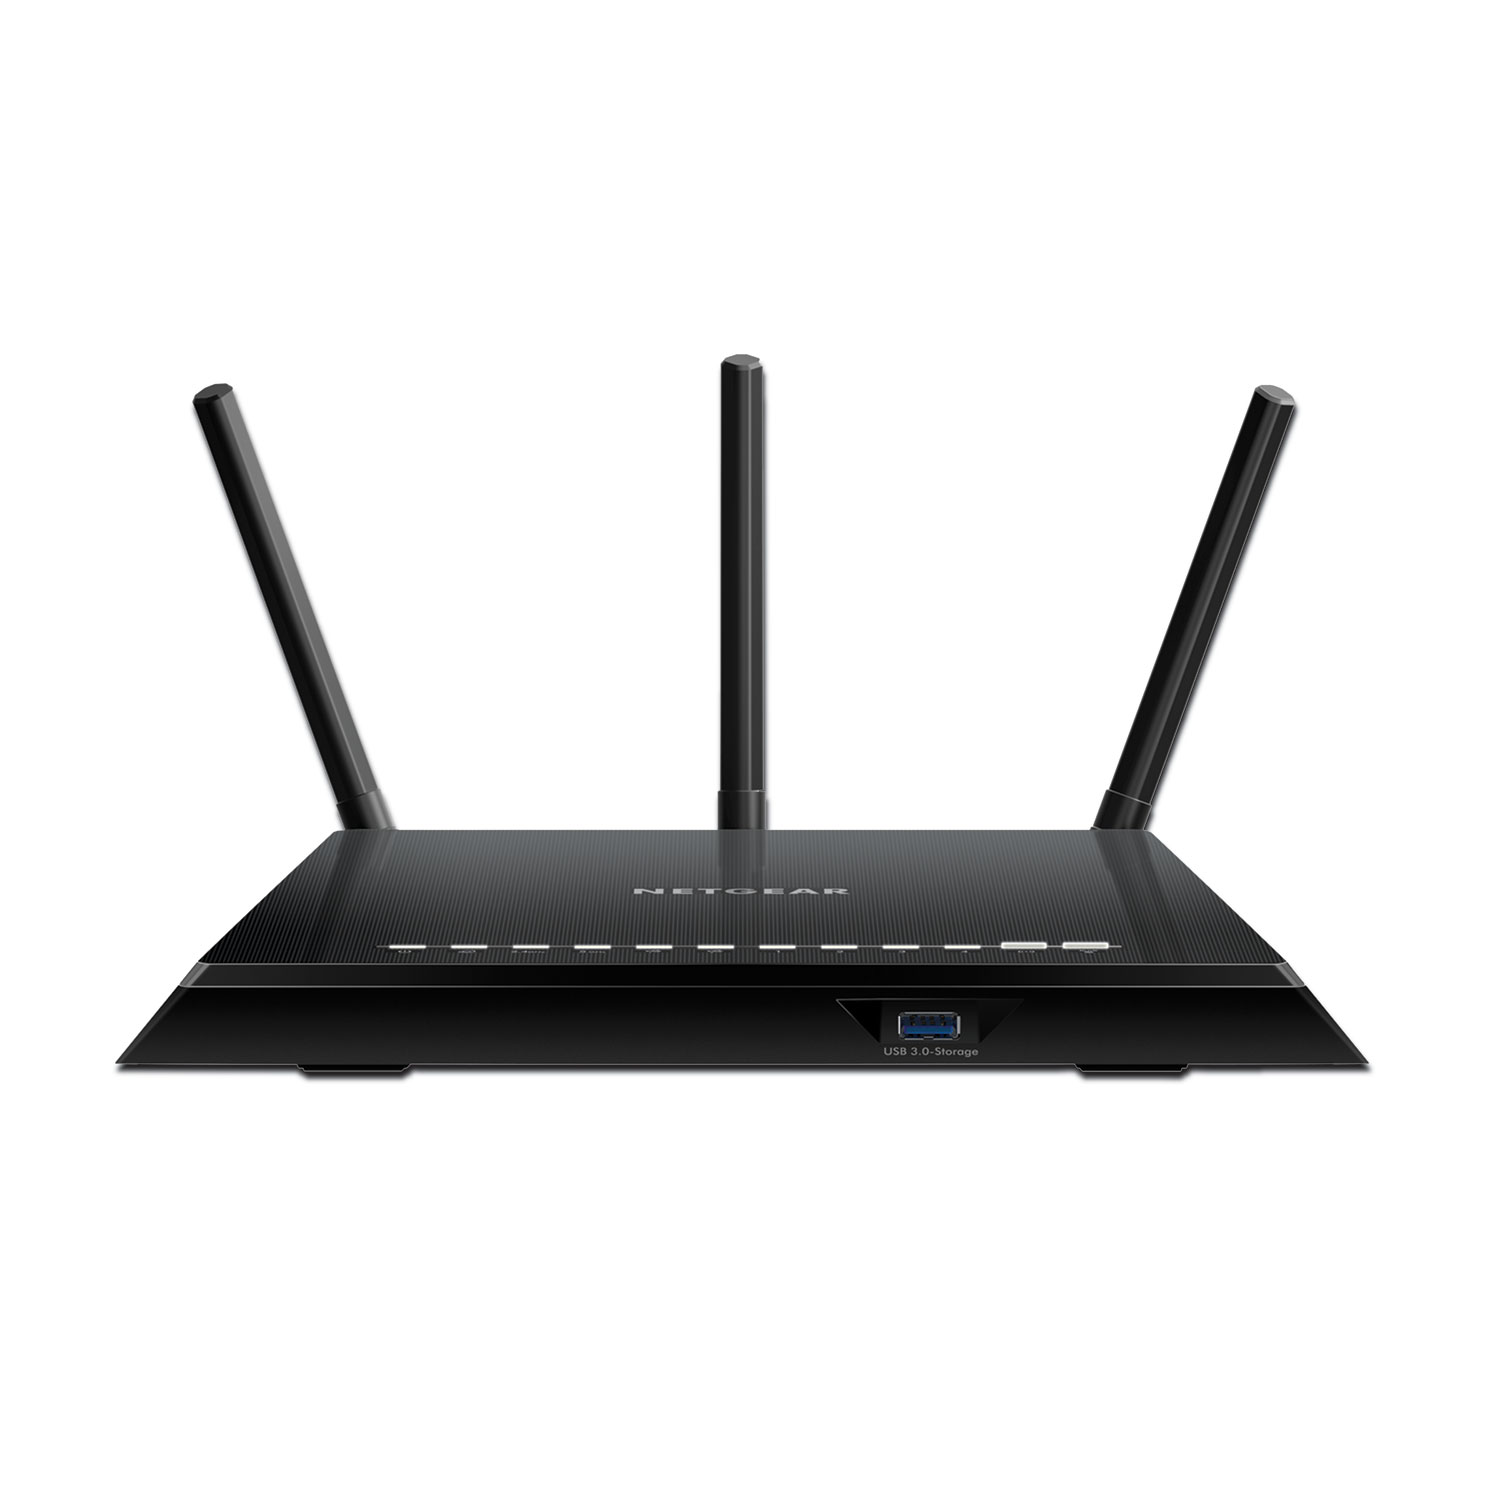  NETGEAR R6400-100NAS AC1750 Smart Wi-Fi Router, 5 Ports, Dual-Band 2.4 GHz/5 GHz (NGR1895945) 